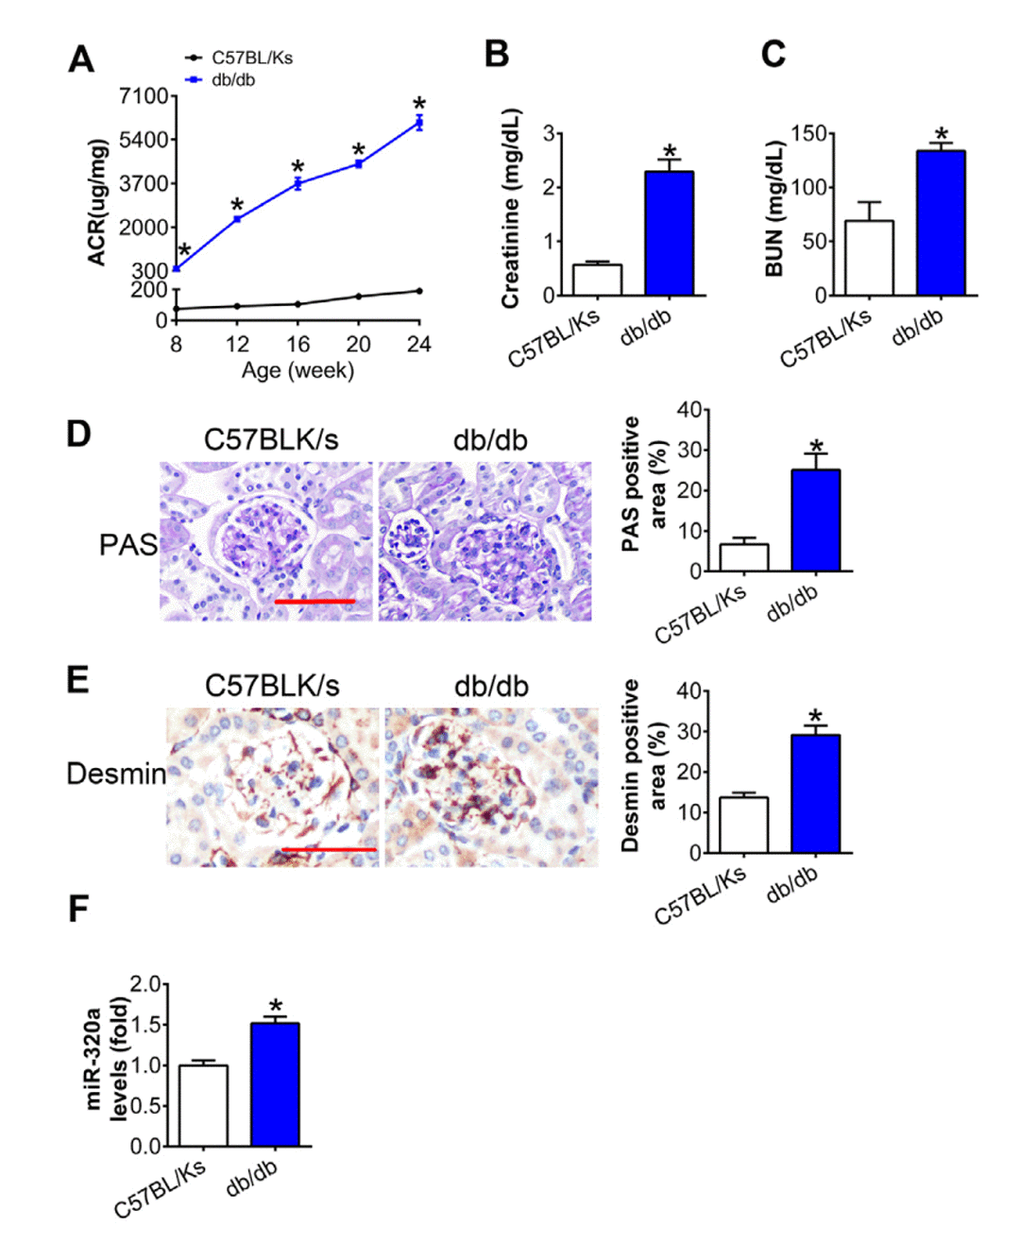 MiR-320a was increased in the kidney of diabetic mice. (A) Urinary ACR was determined every four weeks since the age of 8 weeks. (B) Serum creatinine and (C) BUN were detected at the age of 24 weeks. (D) Representative images of PAS staining of kidneys from C57BL/Ks and db/db mice. Scale bar, 50 μm. (E) Representative images of immunohistochemical staining of Desmin. Scale bar, 50 μm. (F) Relative miR-320a expression in renal cortex measured by real-time PCR. Data are expressed as mean ± SEM, n=8, *P